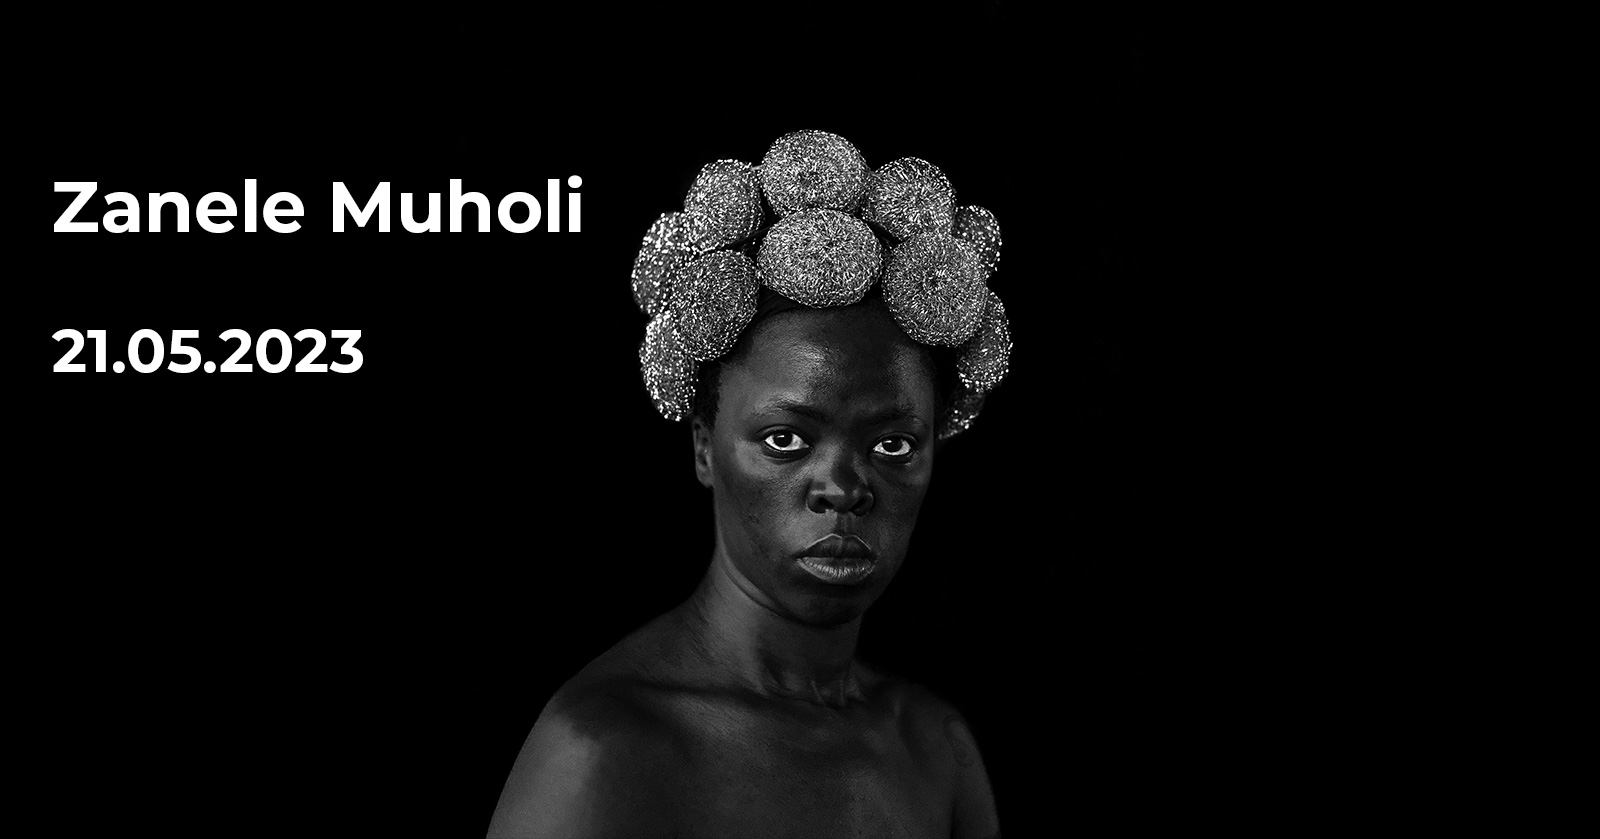 MEP is proud to present the first retrospective in France dedicated to Zanele Muholi: